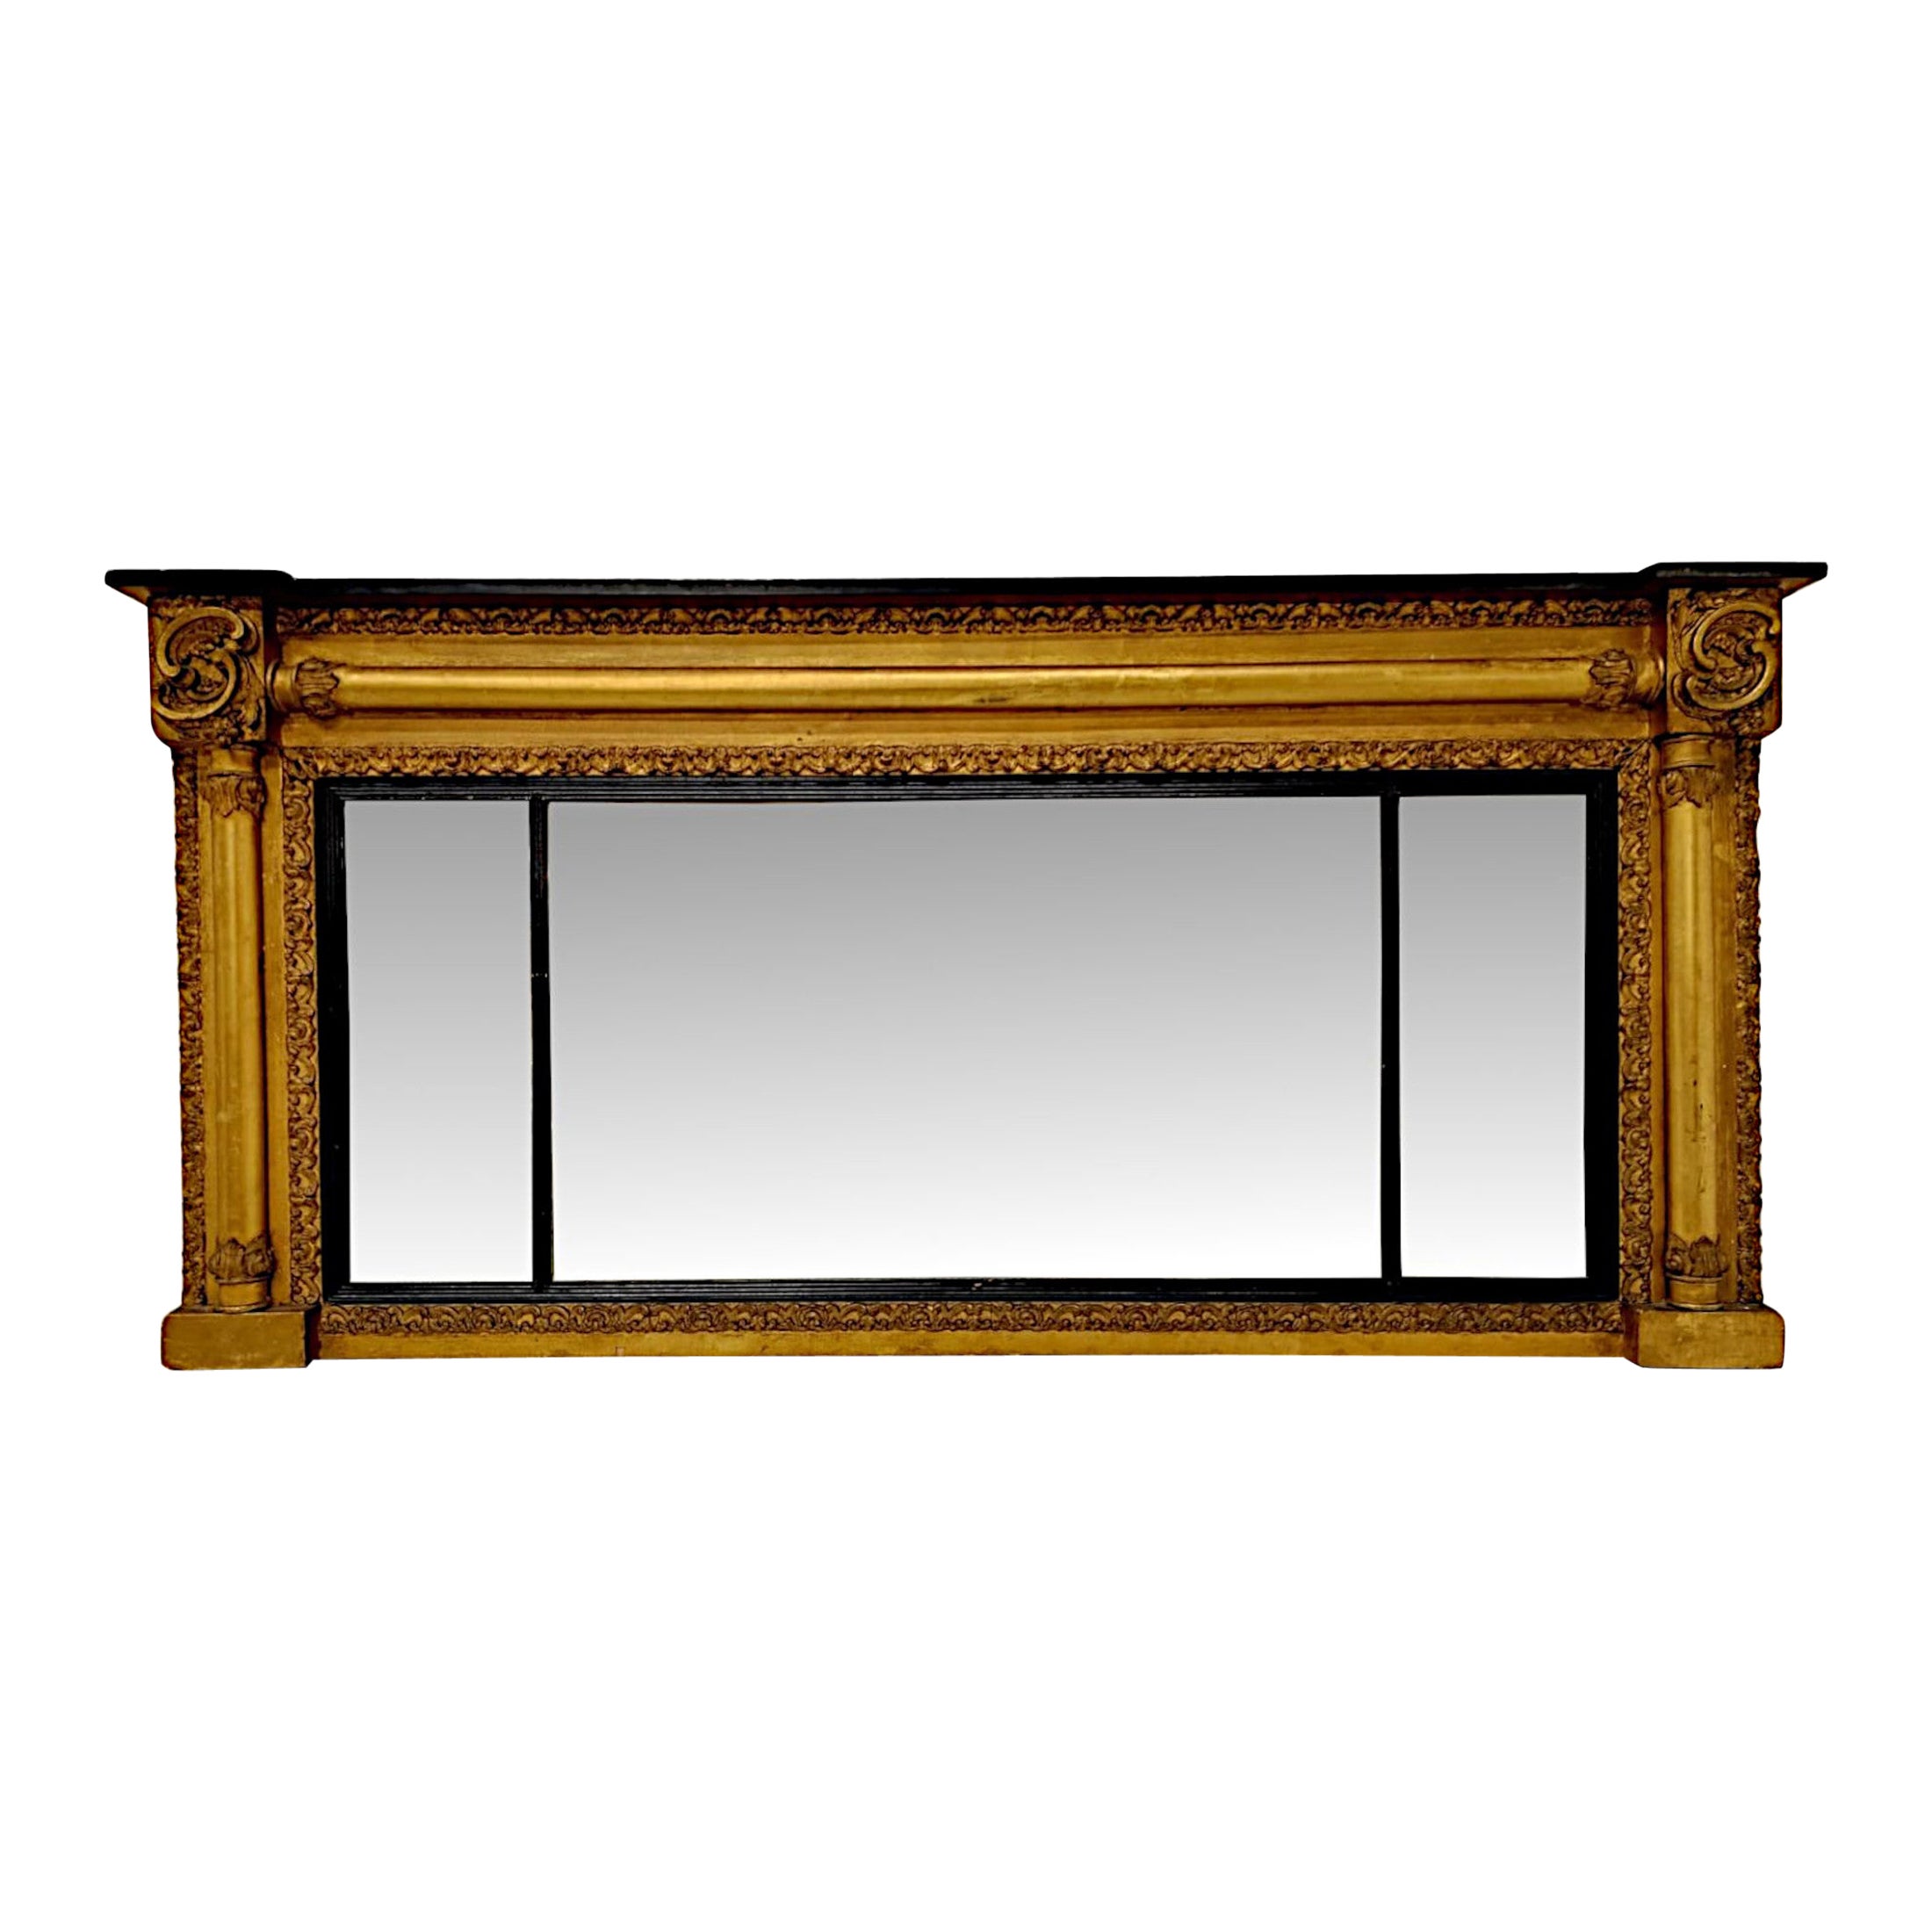 A Stunning Unusual 19th Century Giltwood Tryptch Overmantel Mirror